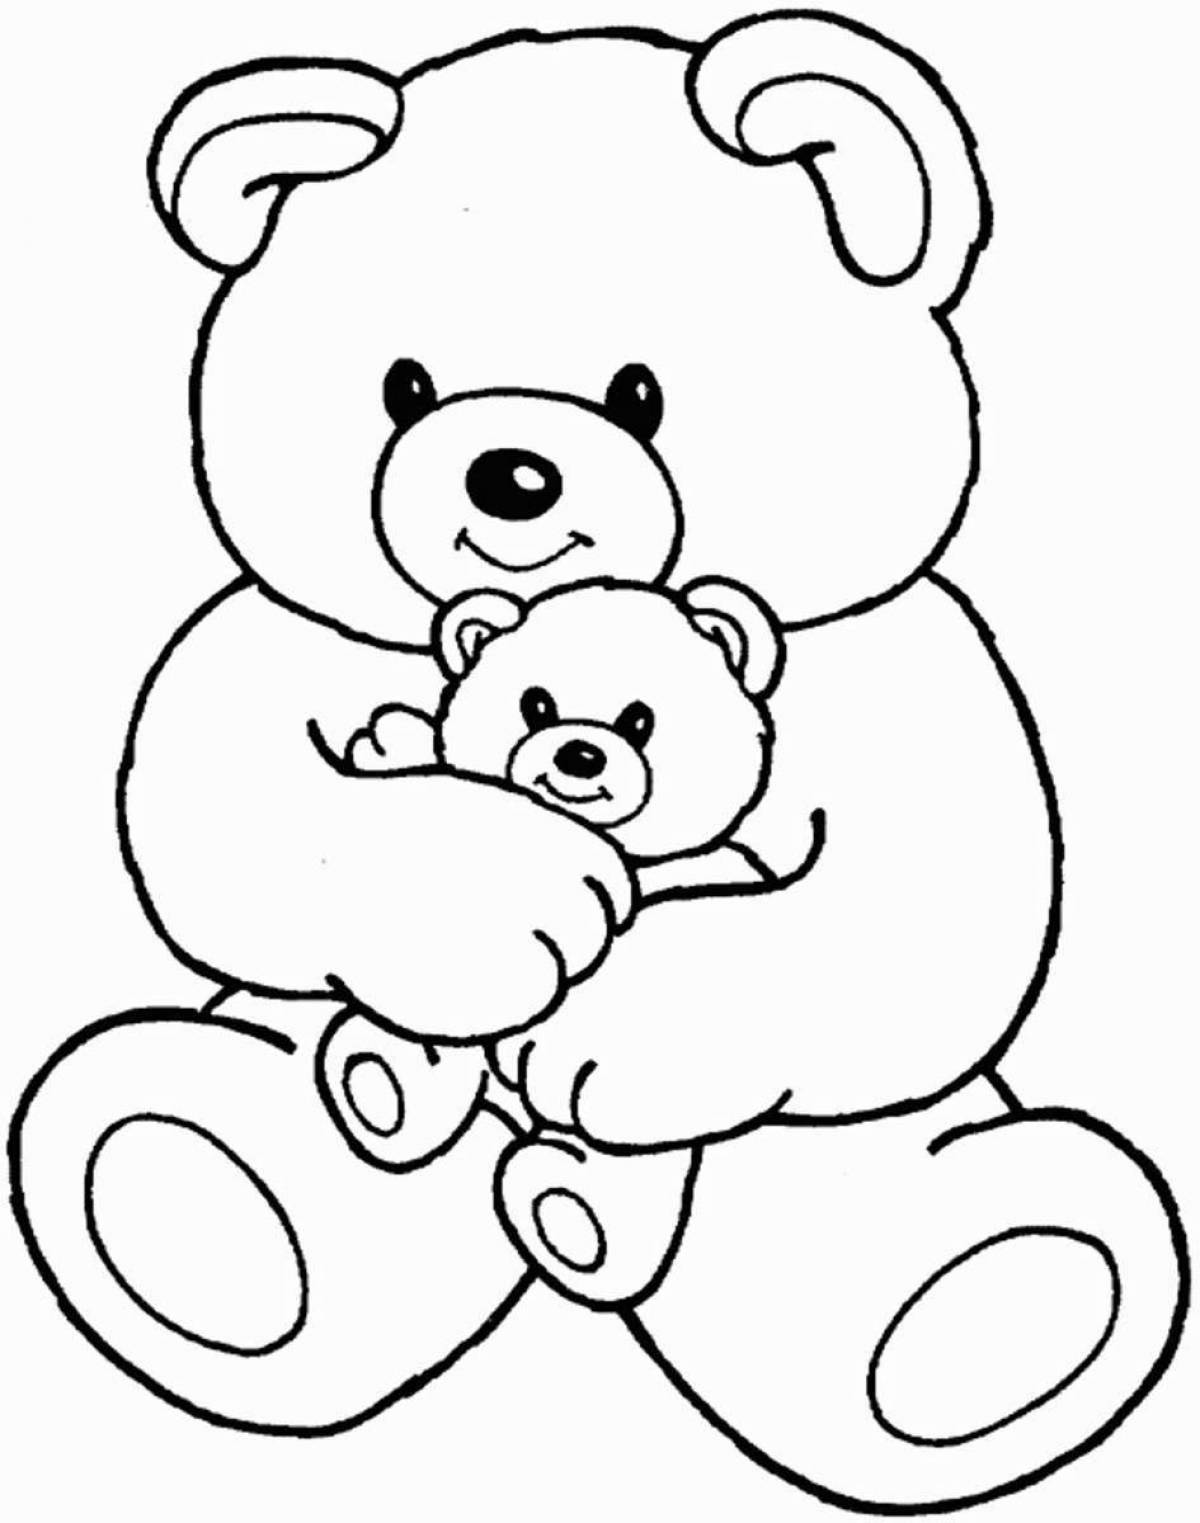 Funny teddy bear coloring book for children 5-6 years old